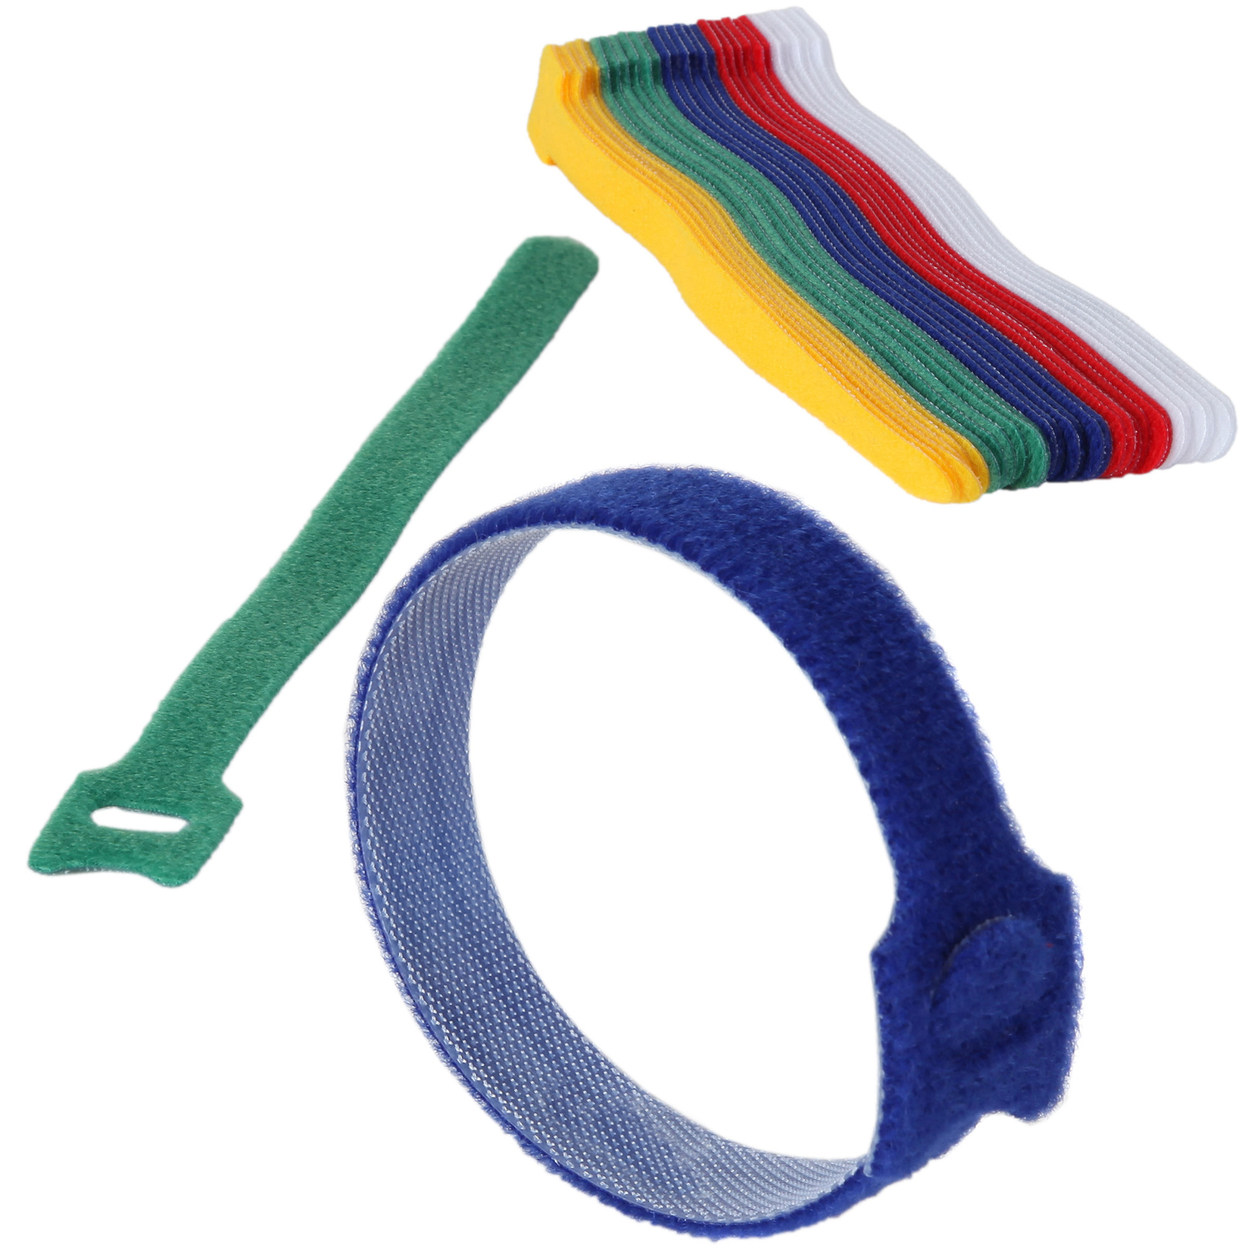 30 Reusable Wire Cable Ties 5 Colors Organize Wires Cable Cords Wrap Chargers